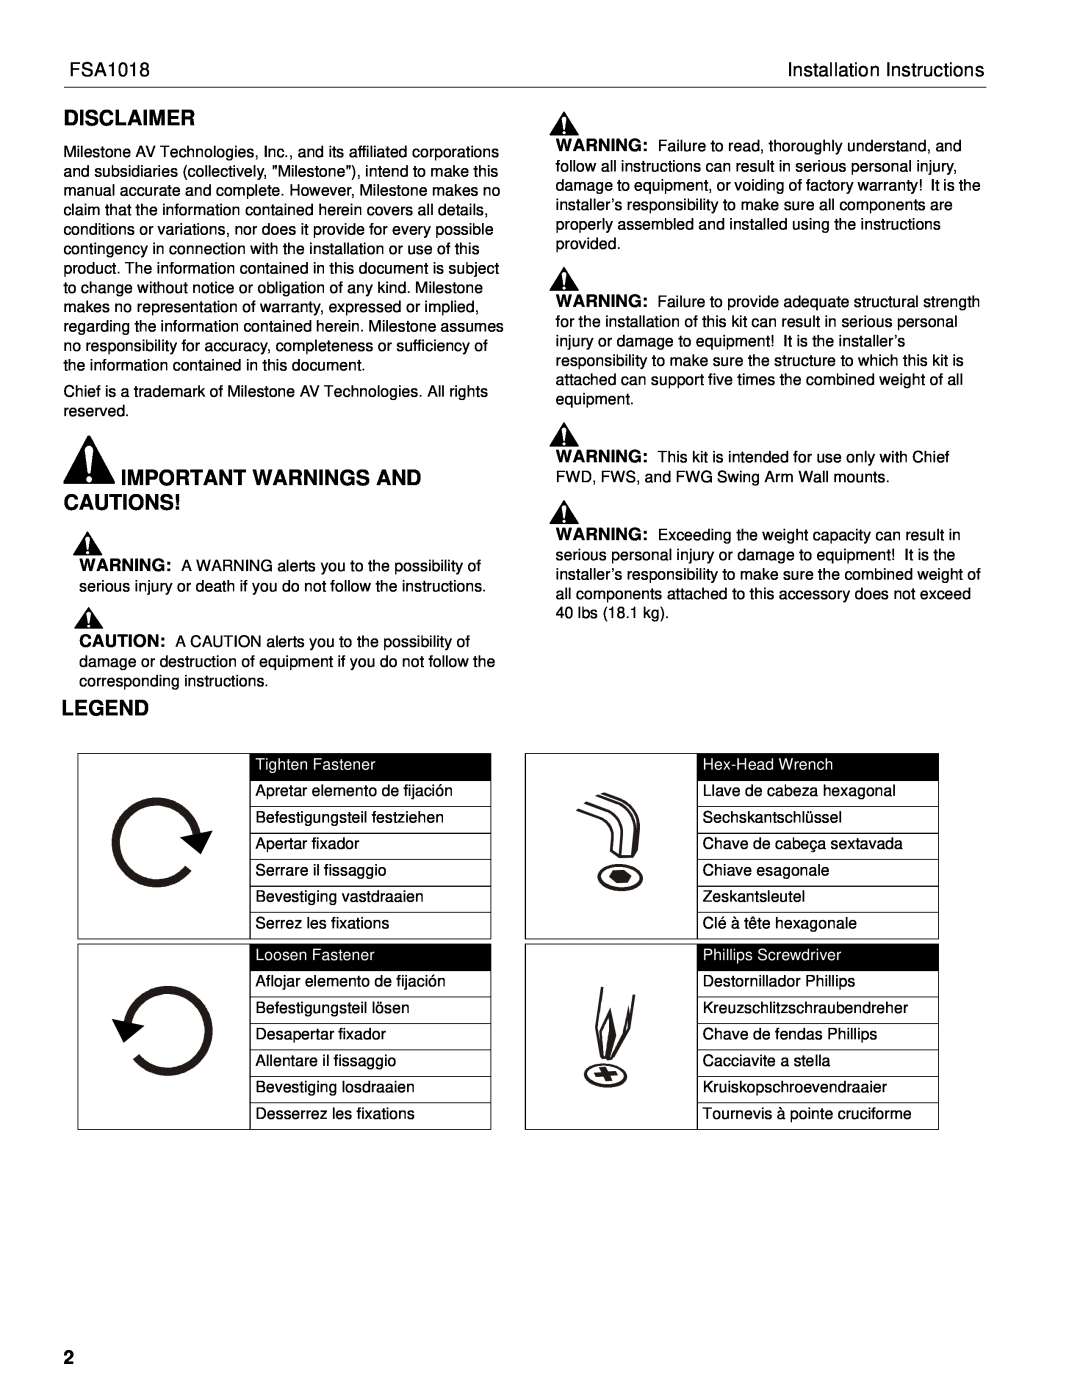 Chief Manufacturing FSA1018 Disclaimer, Important Warnings And Cautions, Installation Instructions, Tighten Fastener 